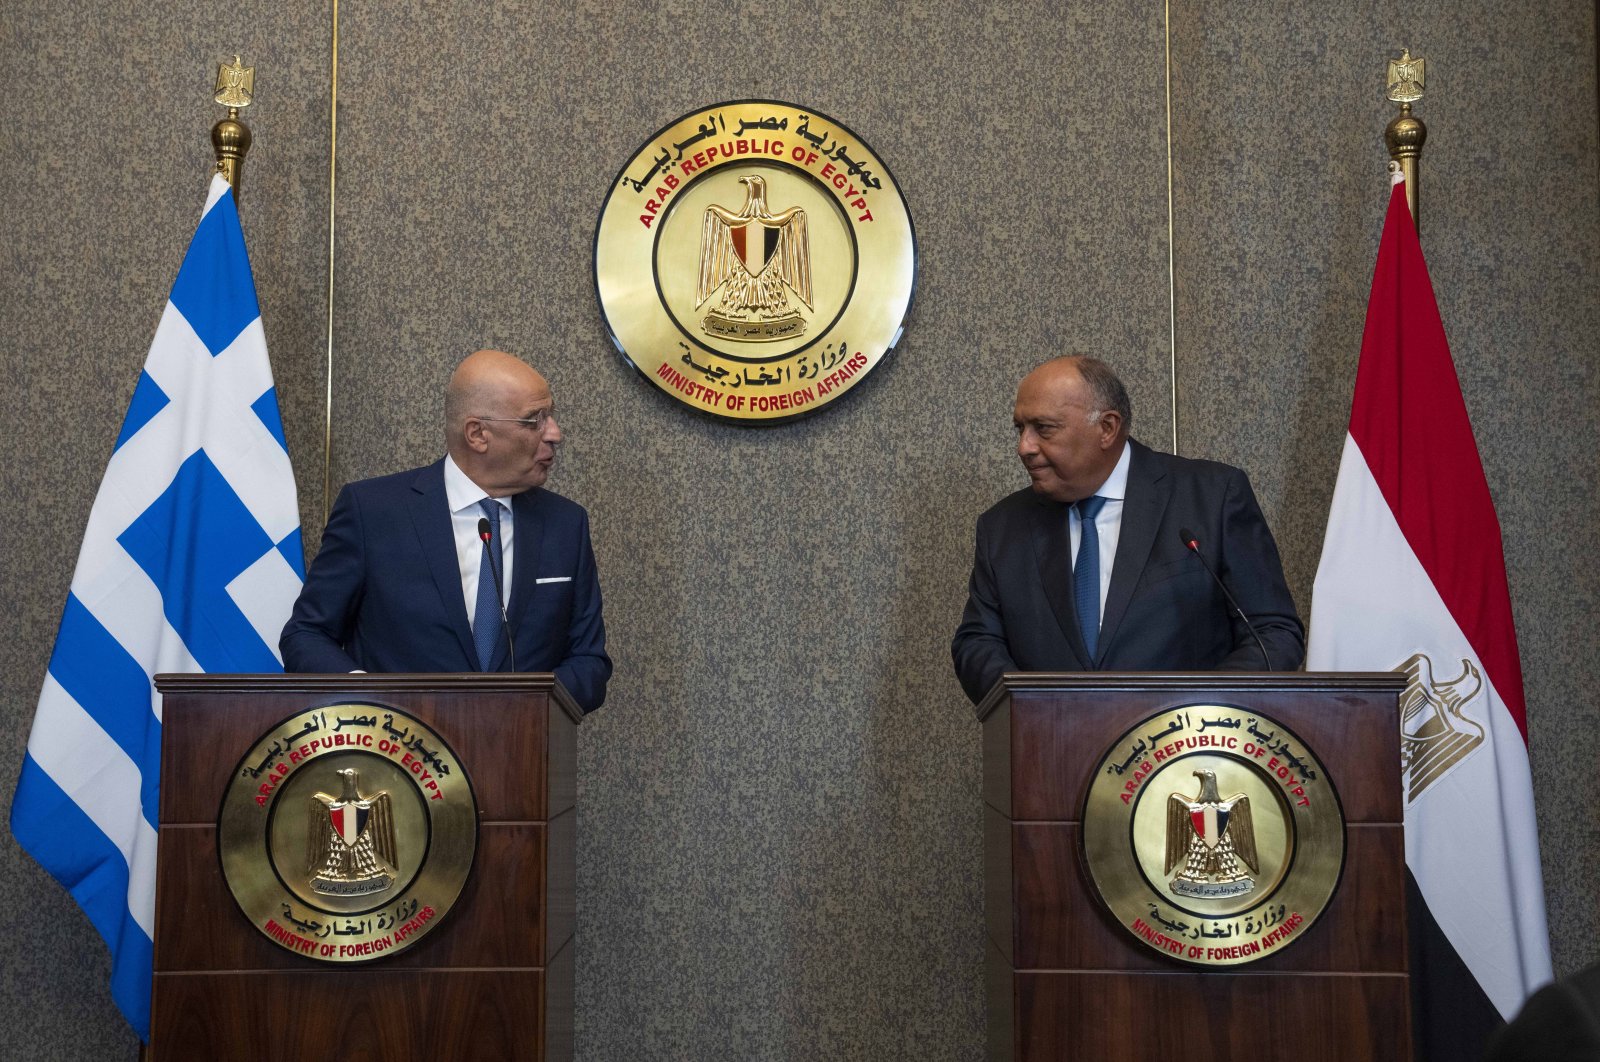 Greek Foreign Minister Nikos Dendias (L) and Egyptian Foreign Minister Sameh Shukry hold a joint press conference, at the foreign ministry headquarters in Cairo, Egypt, Oct. 9, 2022. (AP Photo)